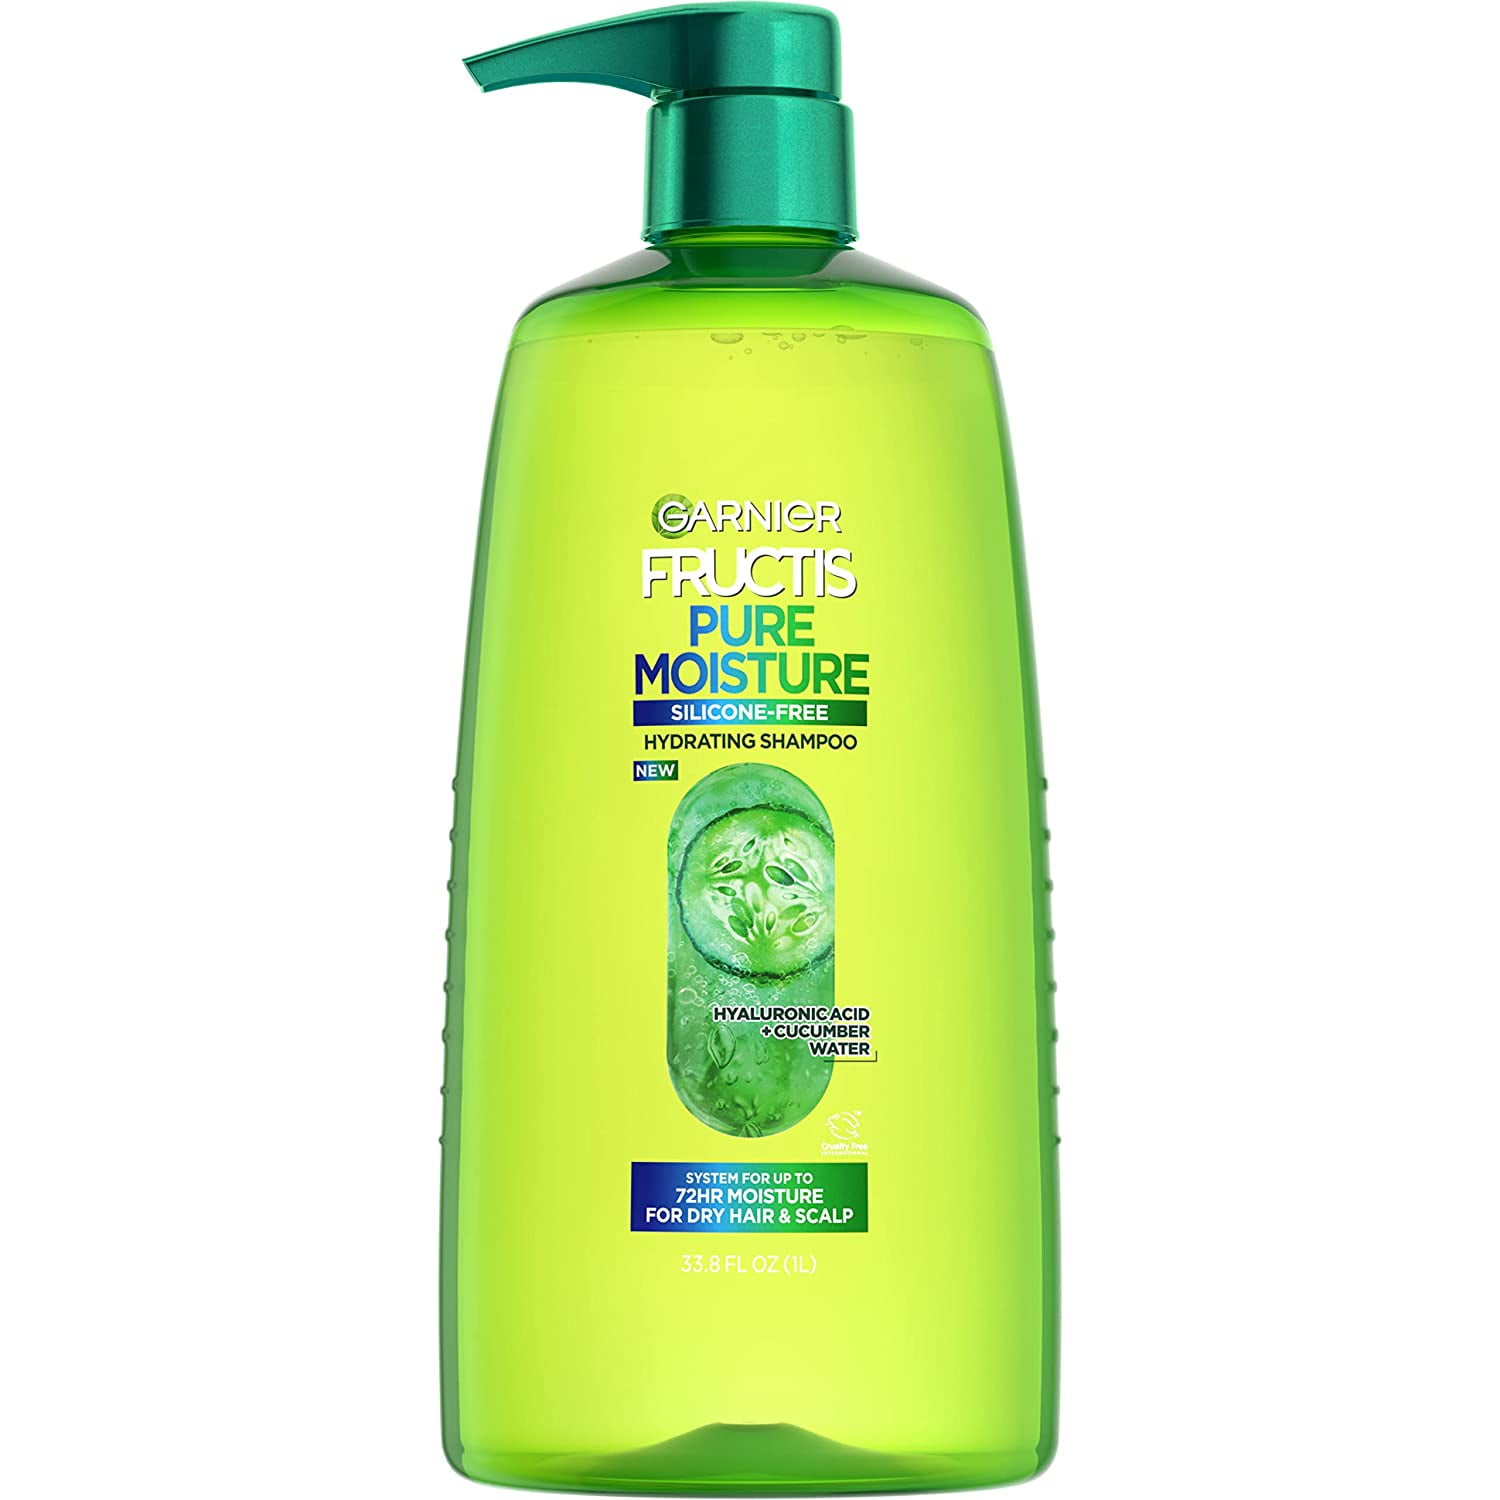 Garnier Fructis Hydrating Shampoo For Dry Hair And Scalp, Paraben-Free, Silicone-Free And Vegan Hair Care, 33.8 Fl Oz - Walmart.com